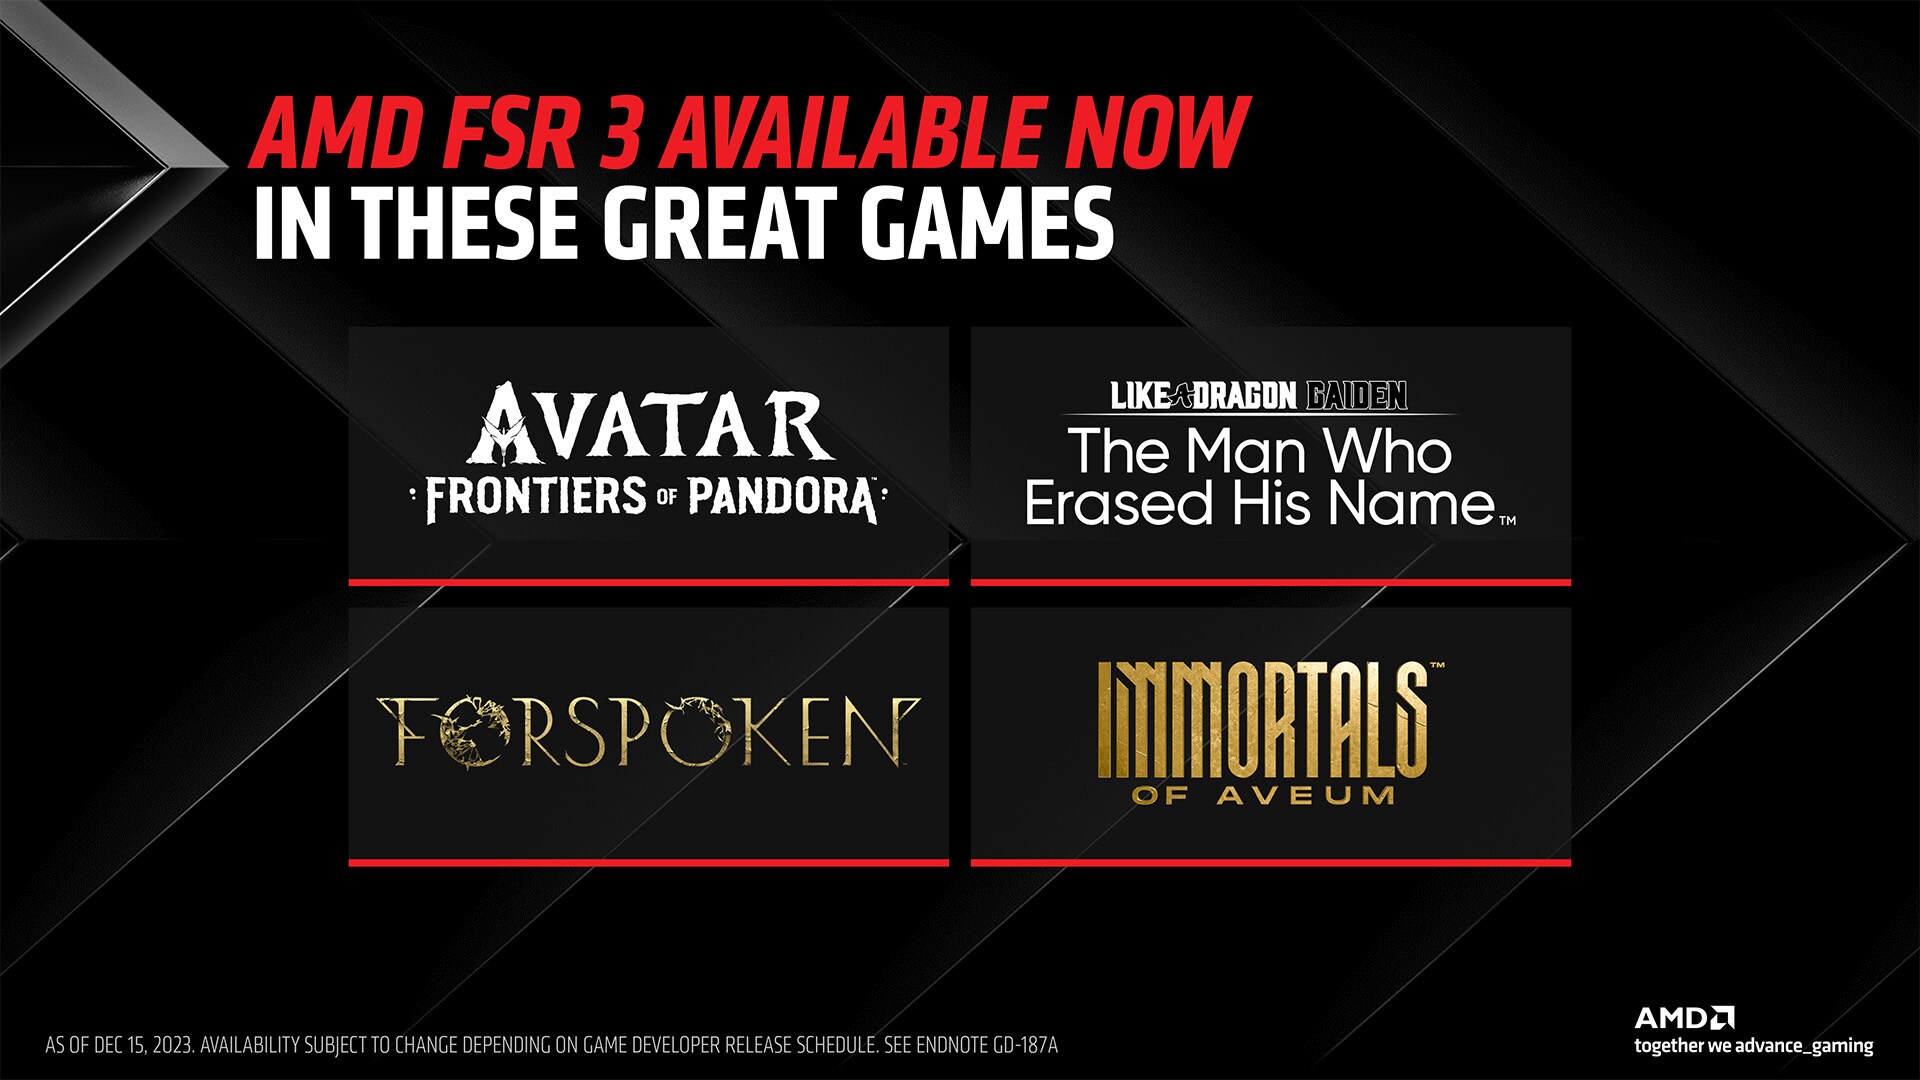 AMD FSR 3 available games - Avatar: Frontiers of Pandora, Like a Dragon Gaiden: The Man Who Erased His Name, Forspoken, and Immortals of Aveum